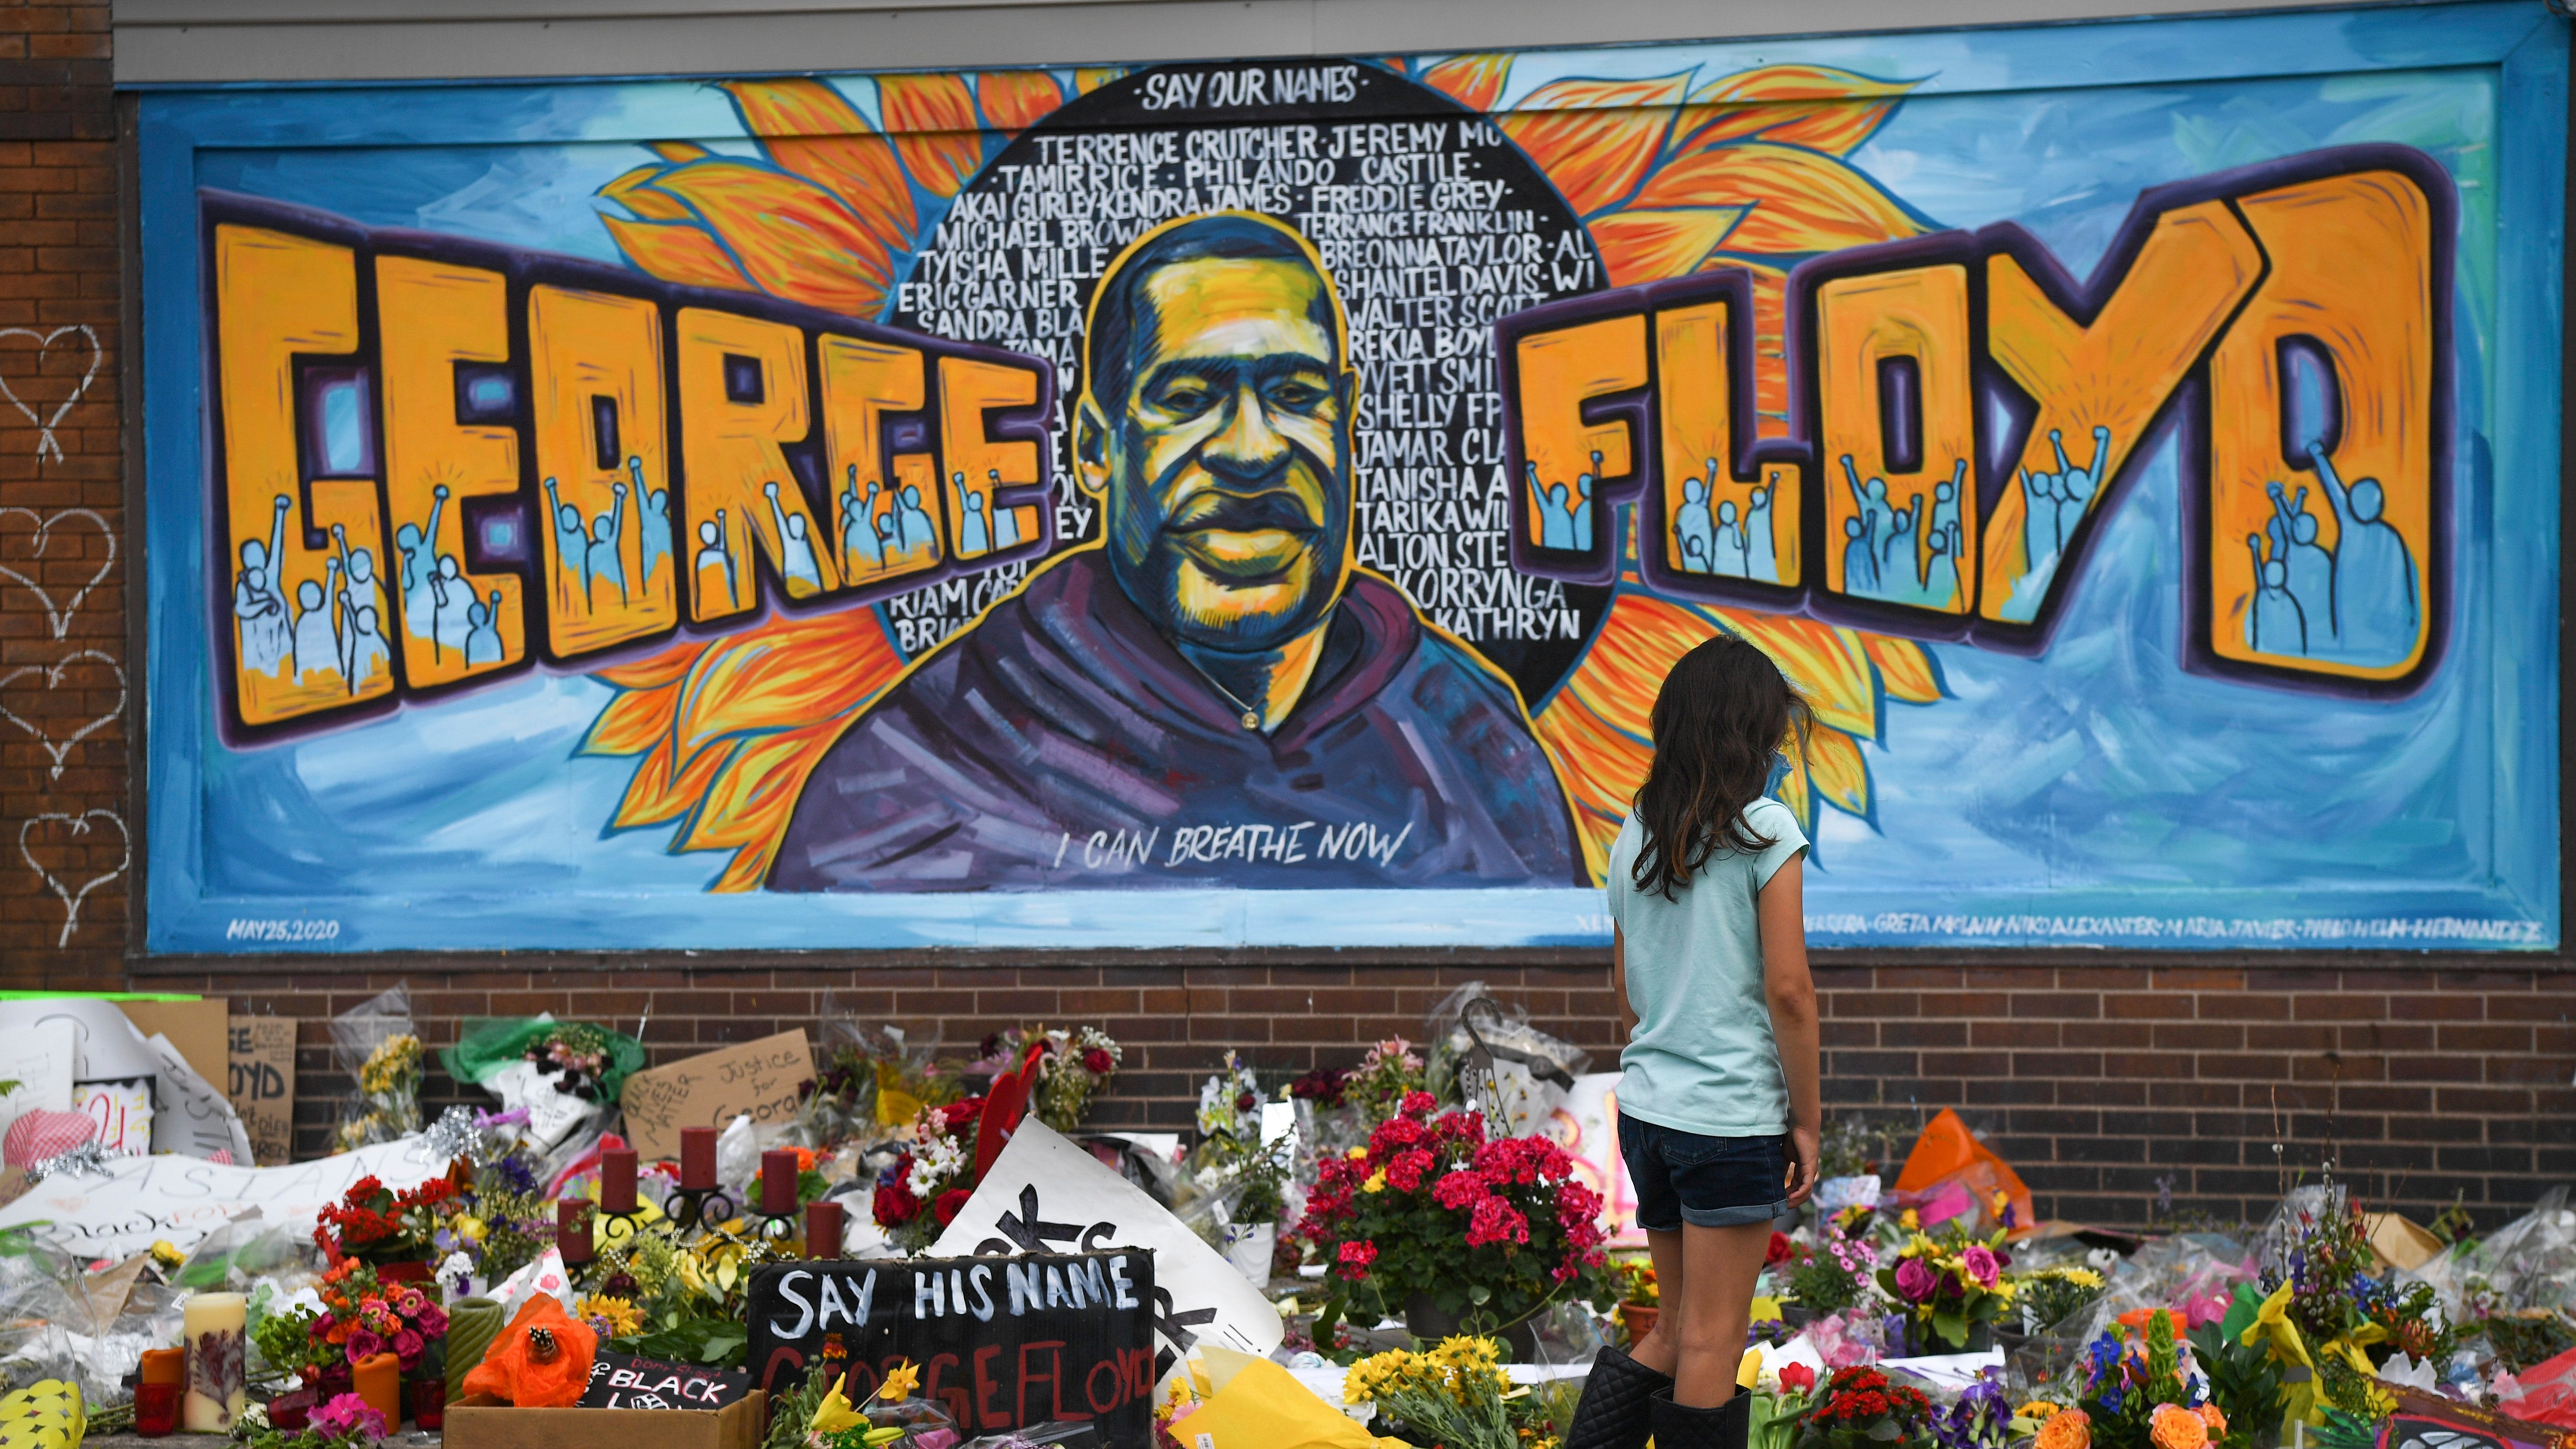 A peaceful vigil at the George Floyd memorial at the Cup Foods Market at the intersection of E. 38th Street and Chicago Ave on Monday, June, 1, 2020. George Floyd died in police custody on May 25, 2020 at this location.